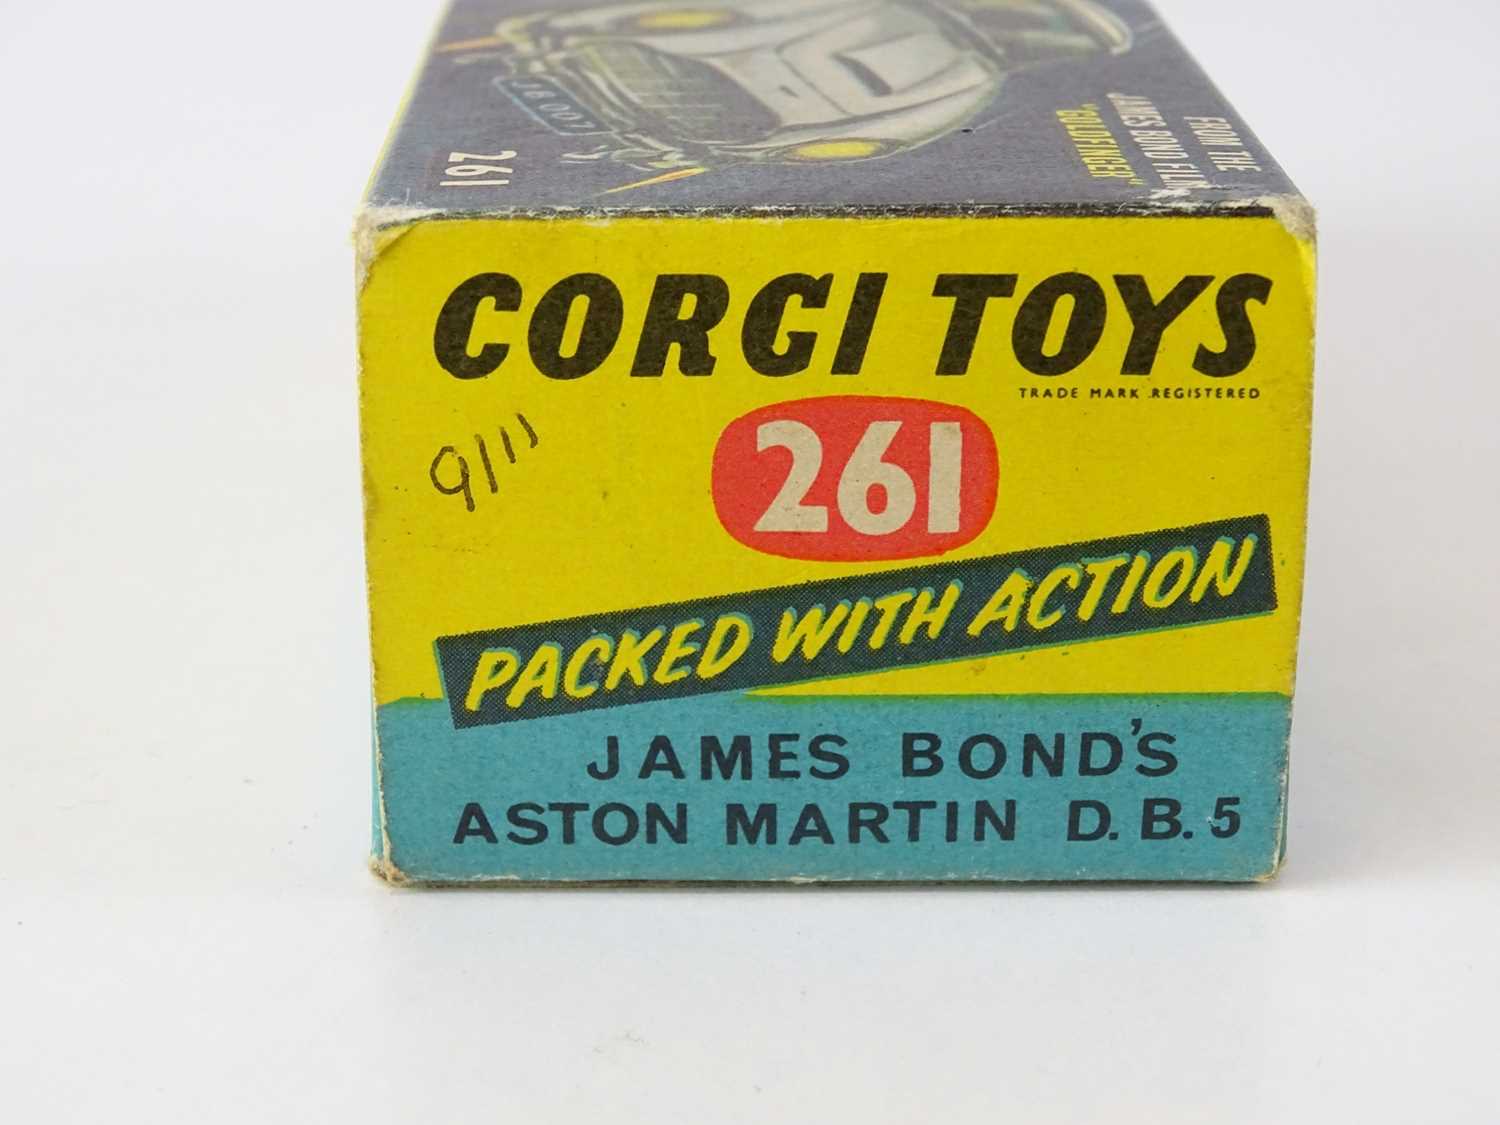 A CORGI Toys 261 James Bond's Aston Martin in gold with working bullet shield, guns and ejector seat - Image 4 of 4